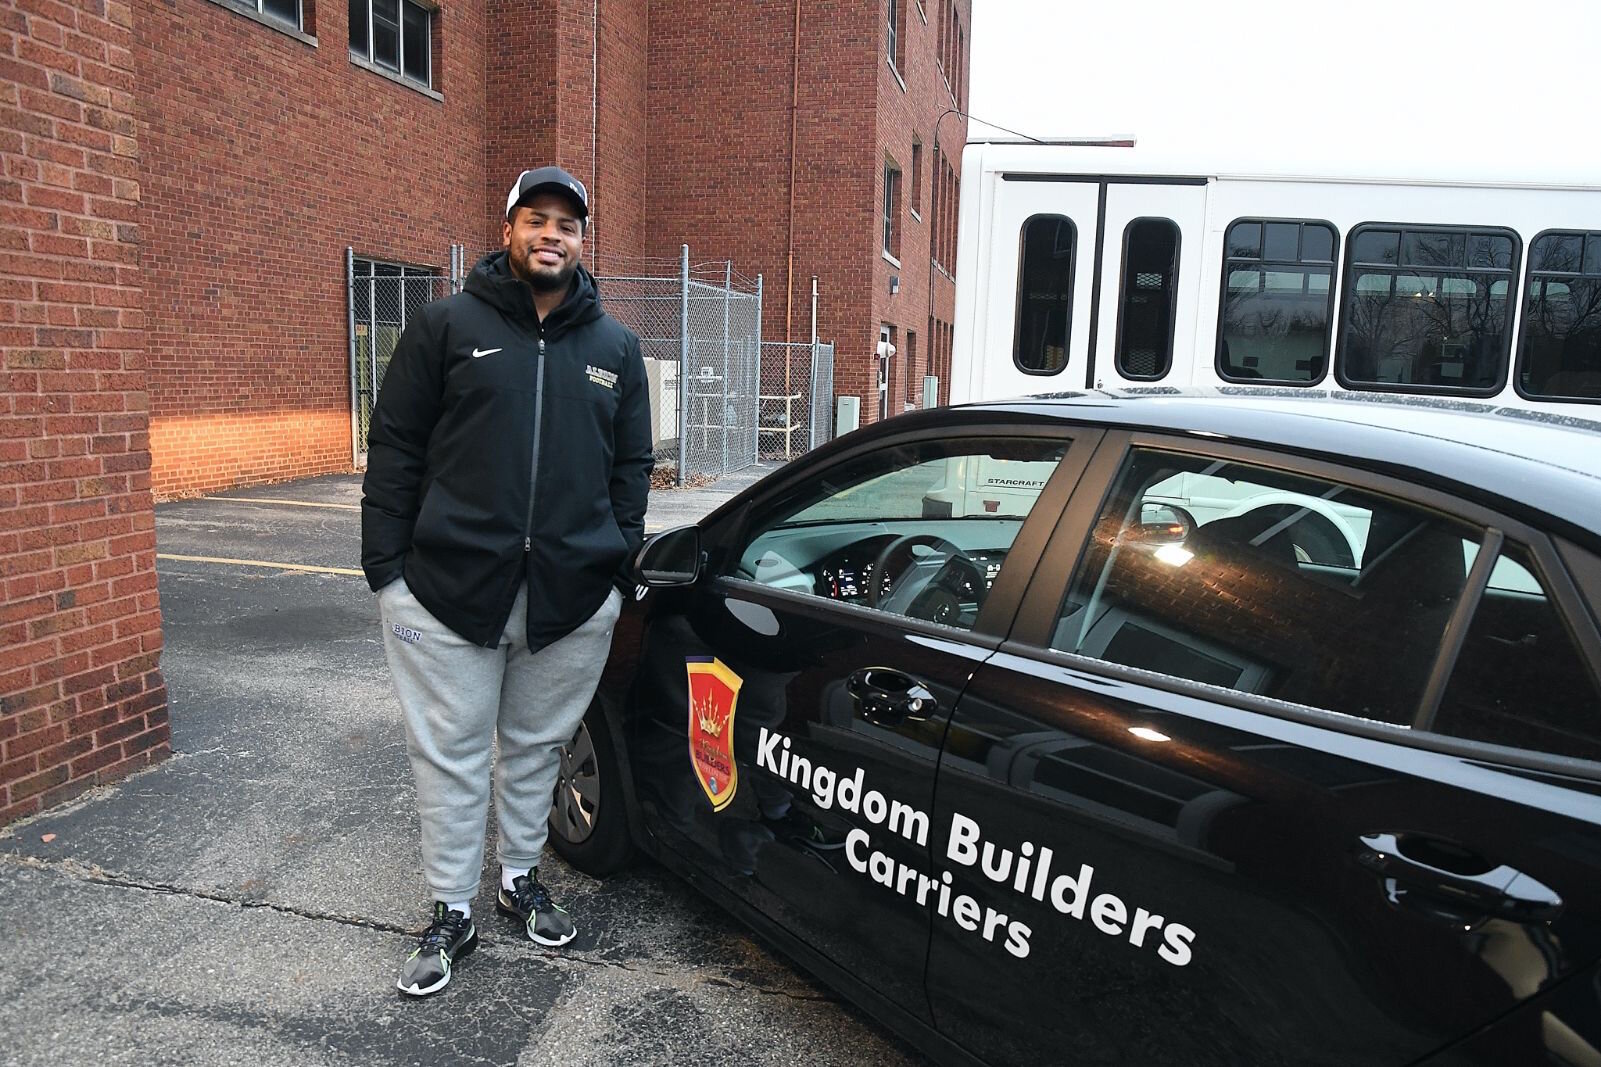 Tino Smith II stands by one of vehicles used by Kingdom Builders Worldwide.